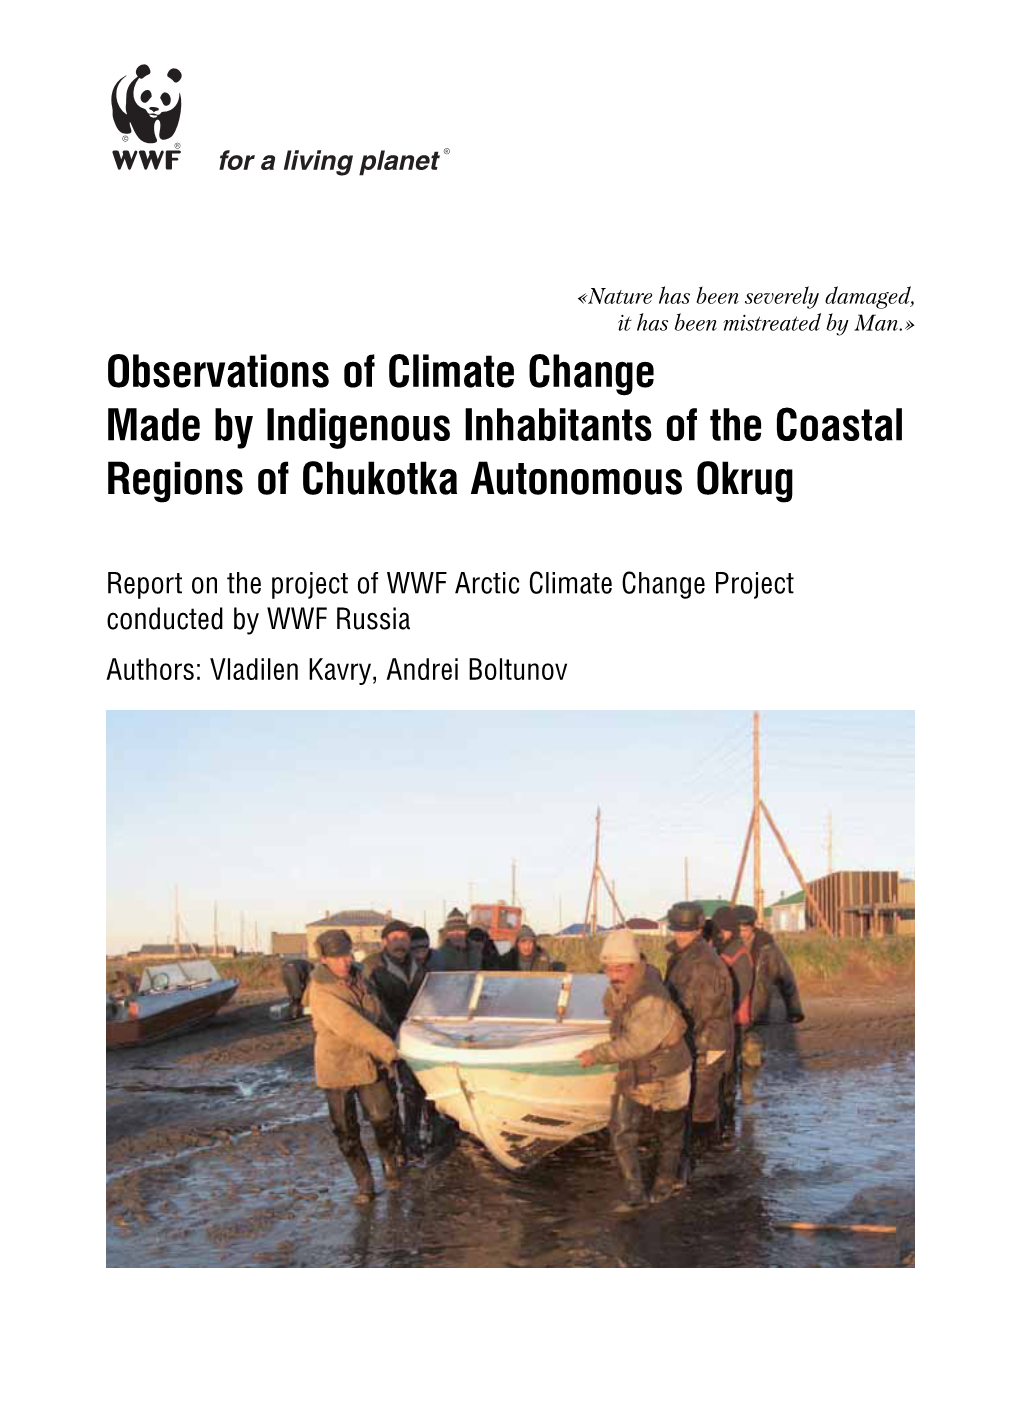 Observations of Climate Change Made by Indigenous Inhabitants of the Coastal Regions of Chukotka Autonomous Okrug